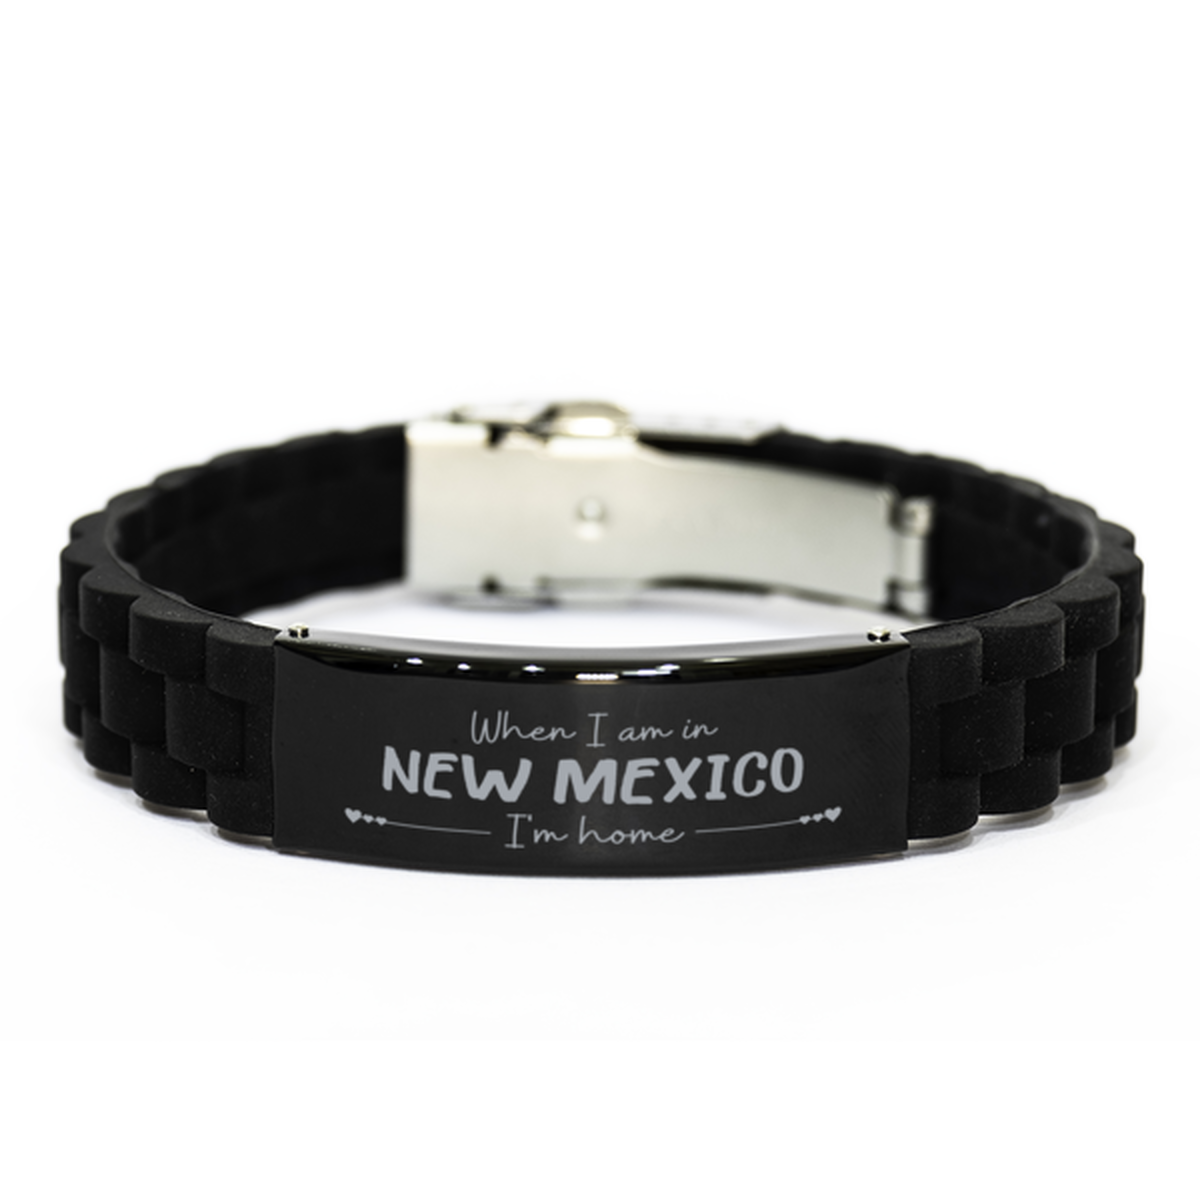 When I am in New Mexico I'm home Black Glidelock Clasp Bracelet, Cheap Gifts For New Mexico, State New Mexico Birthday Gifts for Friends Coworker